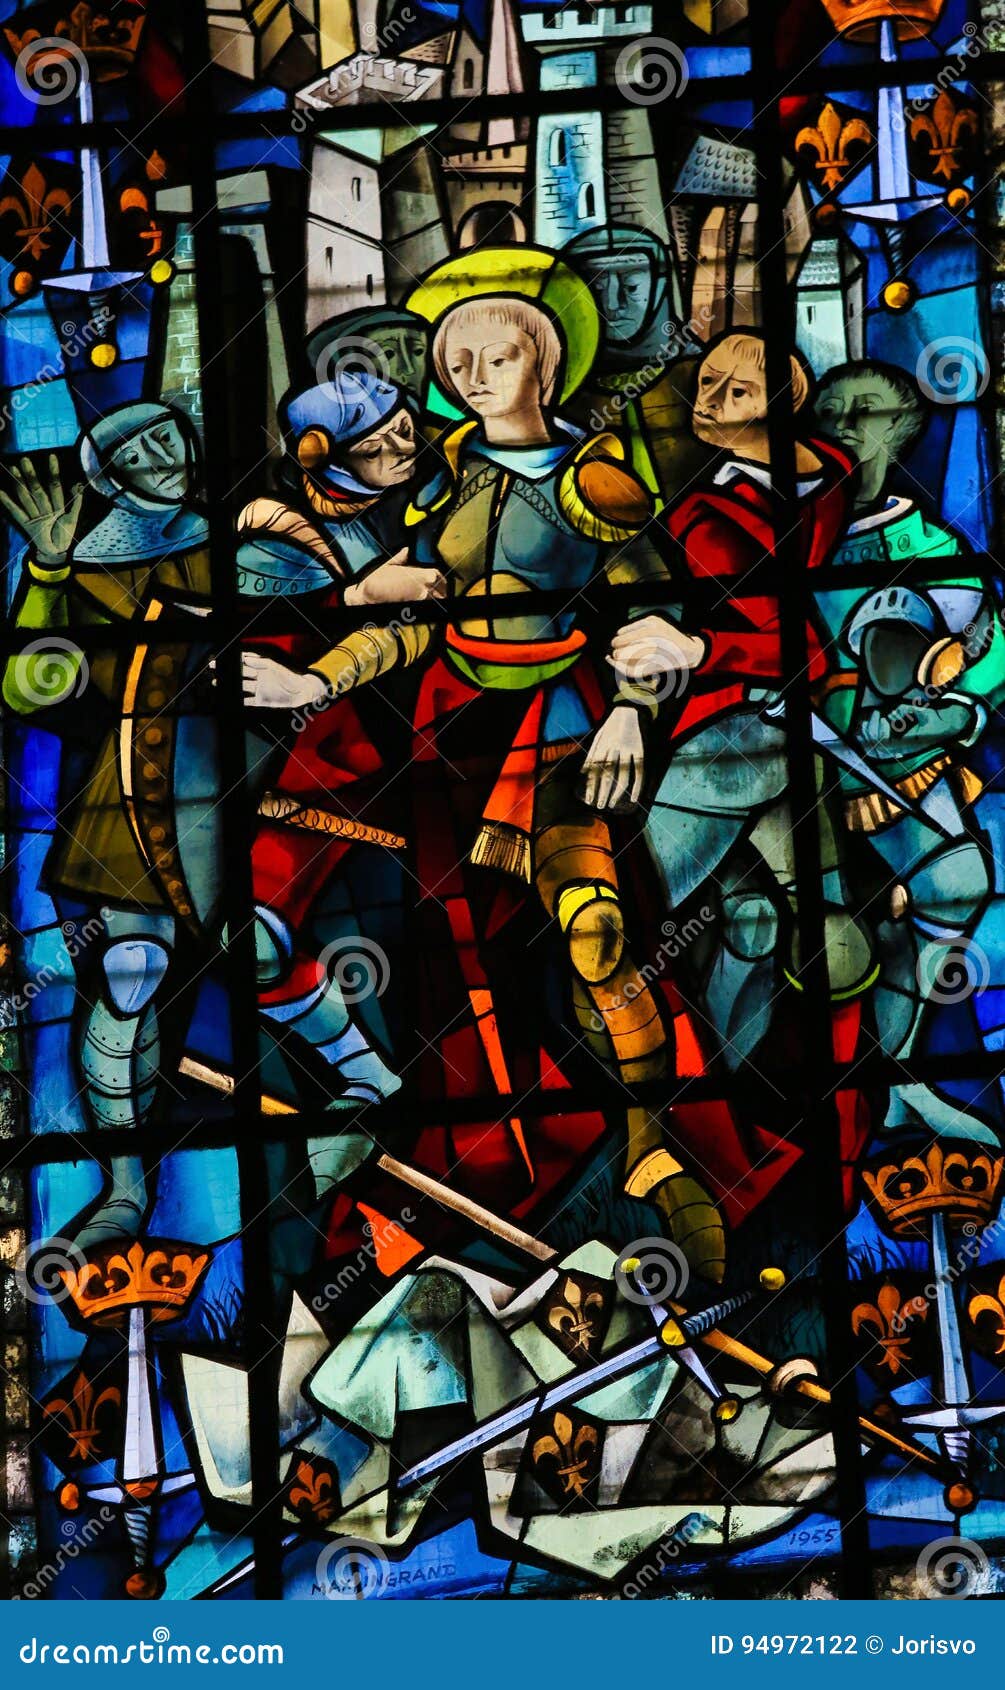 stained glass in rouen cathedral - joan of arc